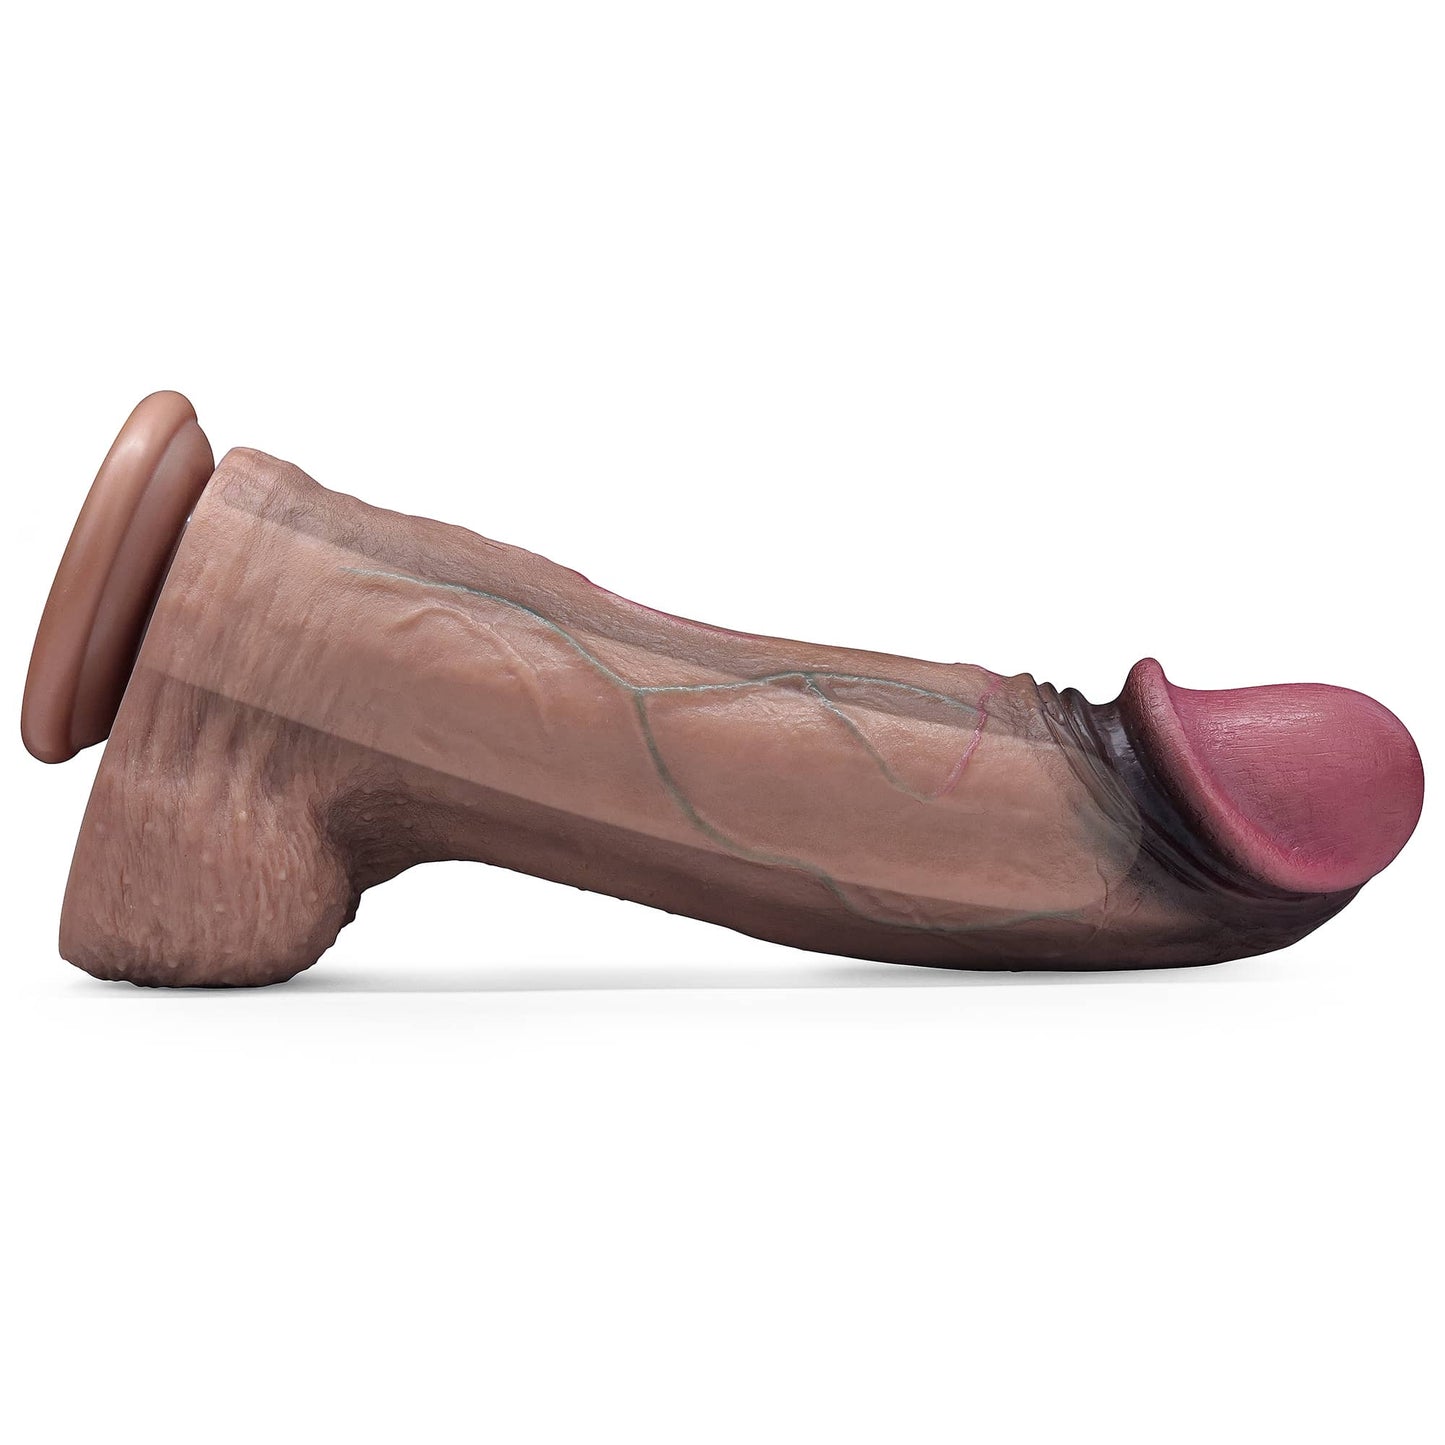 The 13 inches silicone realistic dildo has firm silicone inside and ultra soft silicone outside